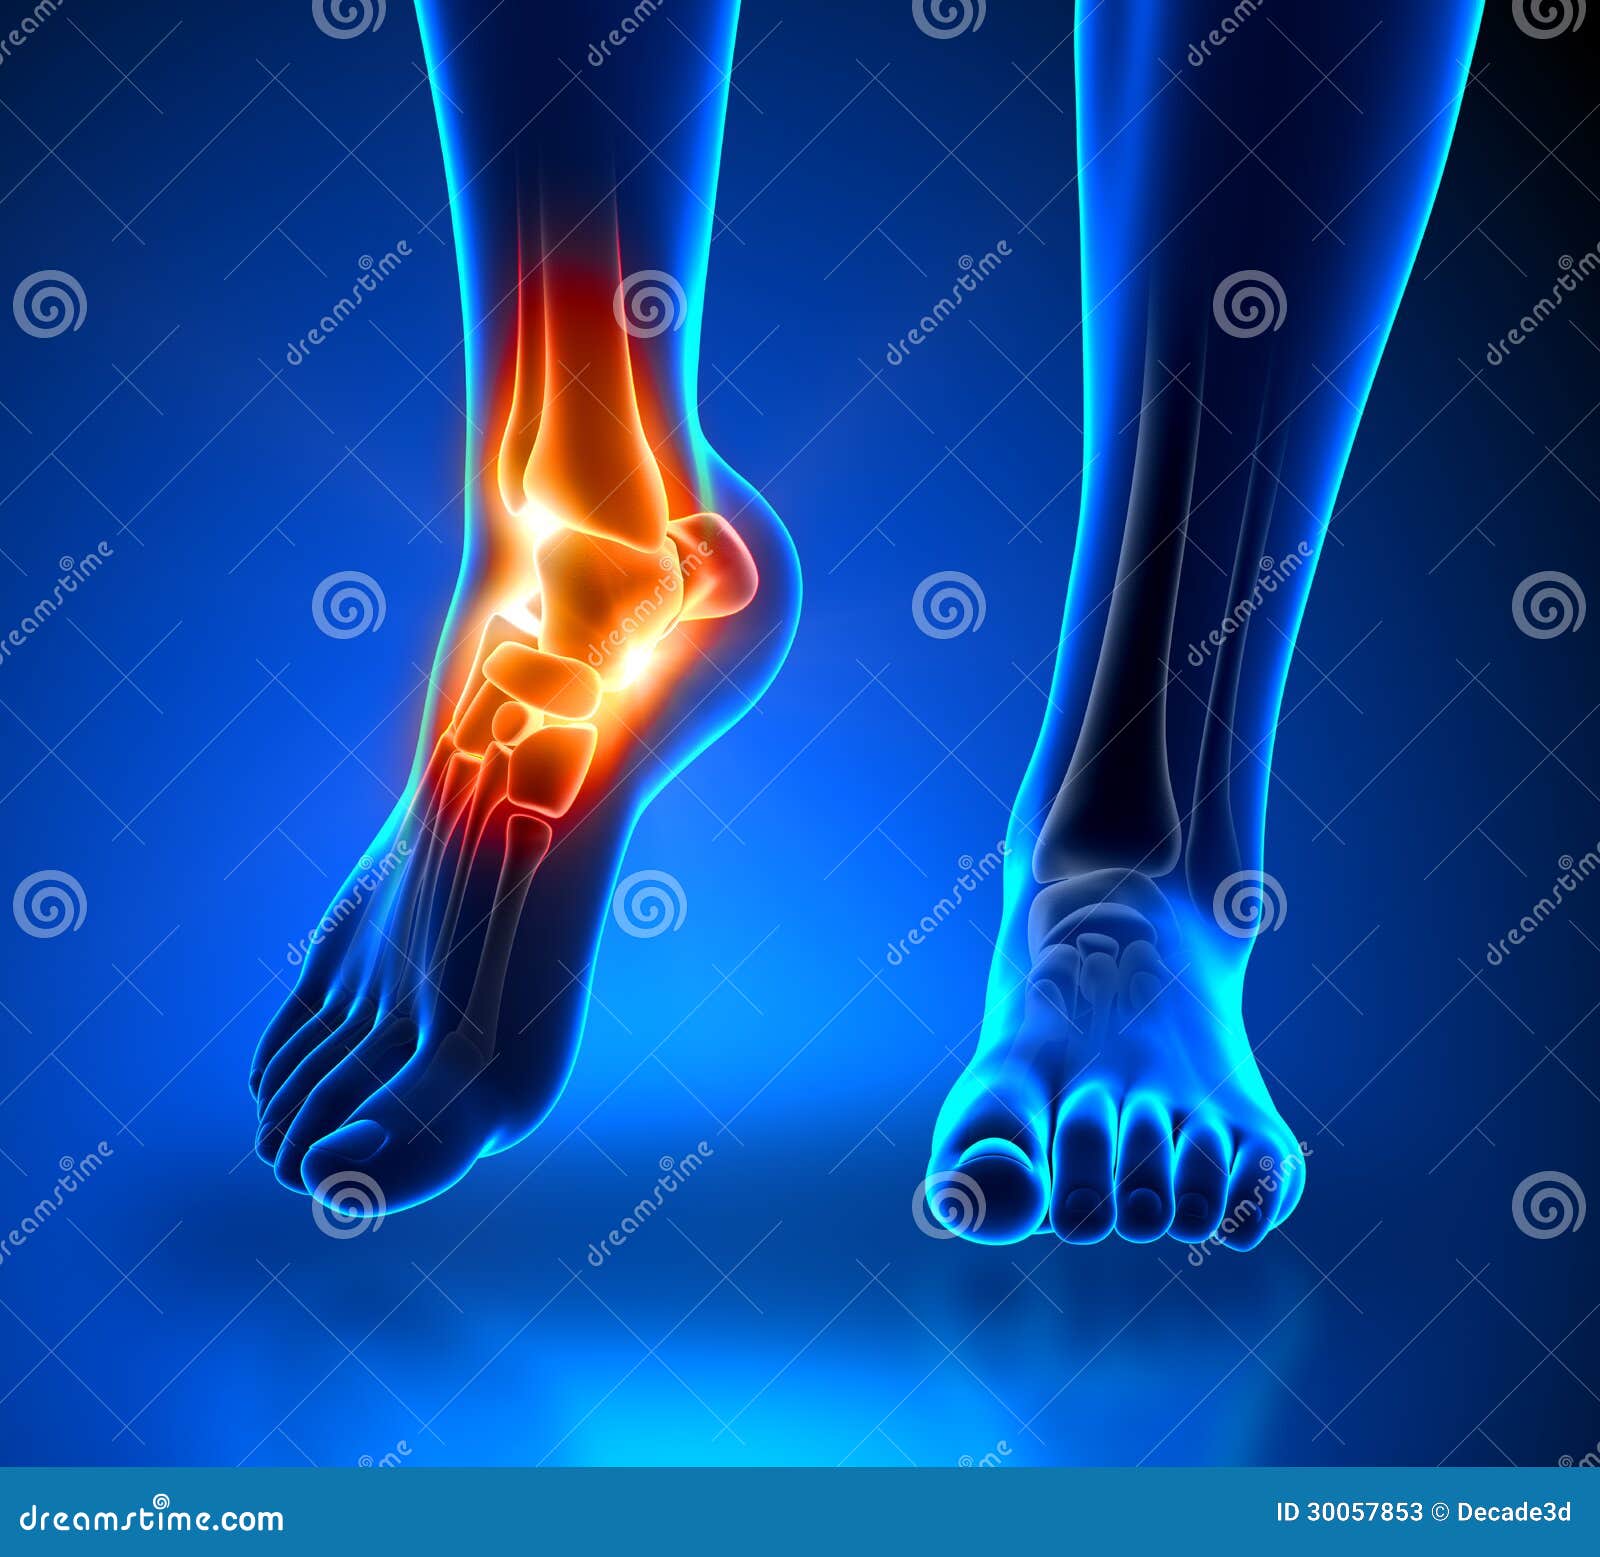 ankle pain - detail